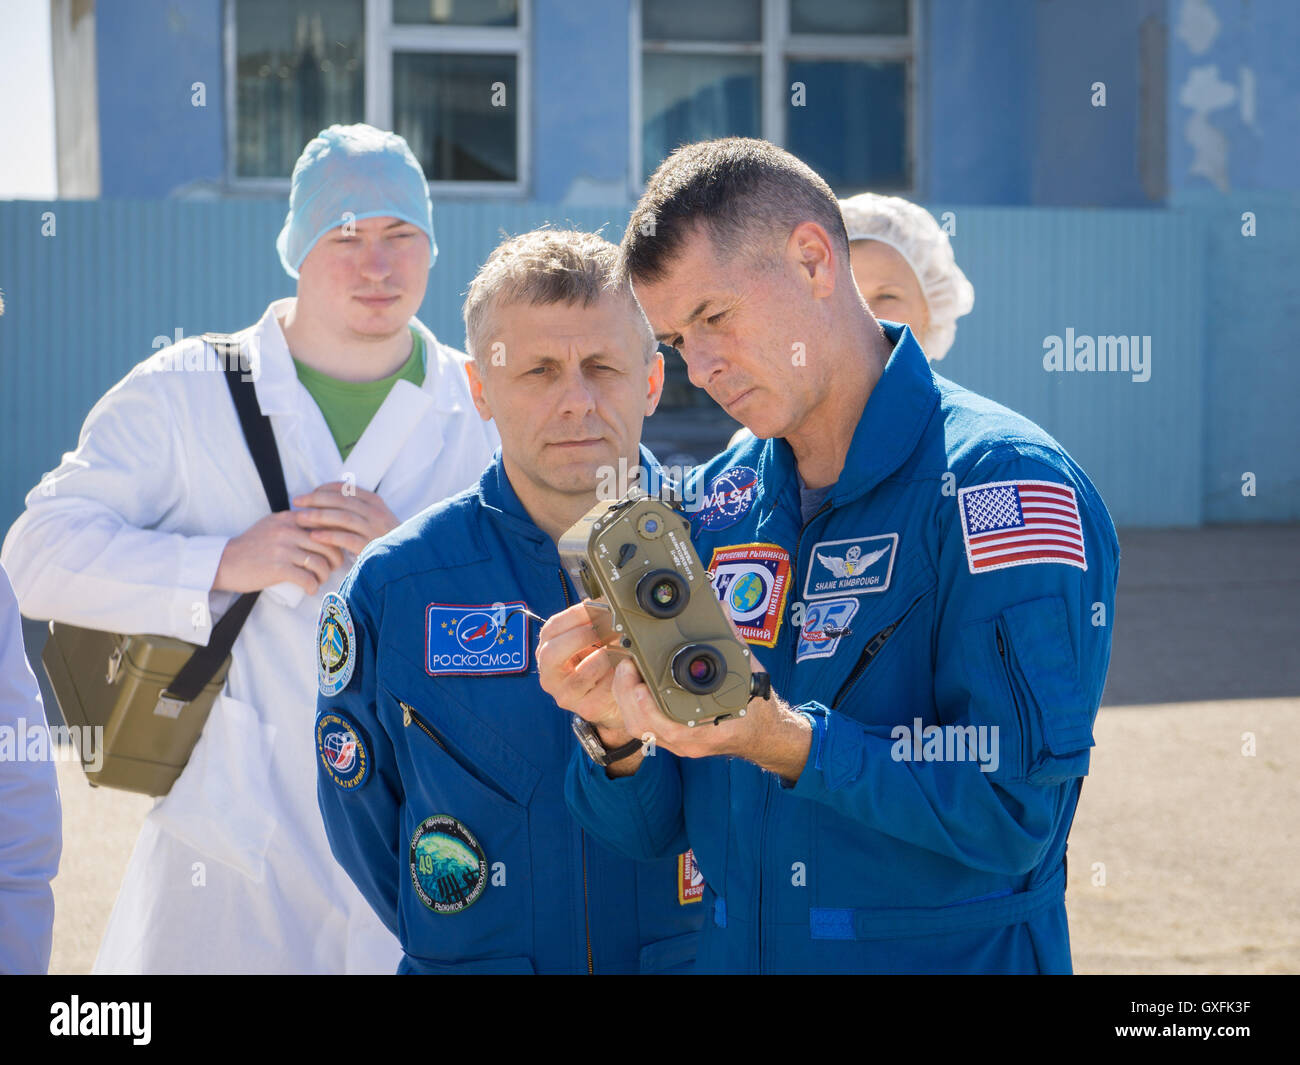 International Space Station Expedition 49 prime crew member Roscosmos cosmonaut Andrey Borisenko watches as NASA astronaut Shane Kimbrough (right) tests a pair of binoculars during pre-launch training at the Baikonur Cosmodrome Integration Facility September 9, 2016 in Kazakhstan. Stock Photo